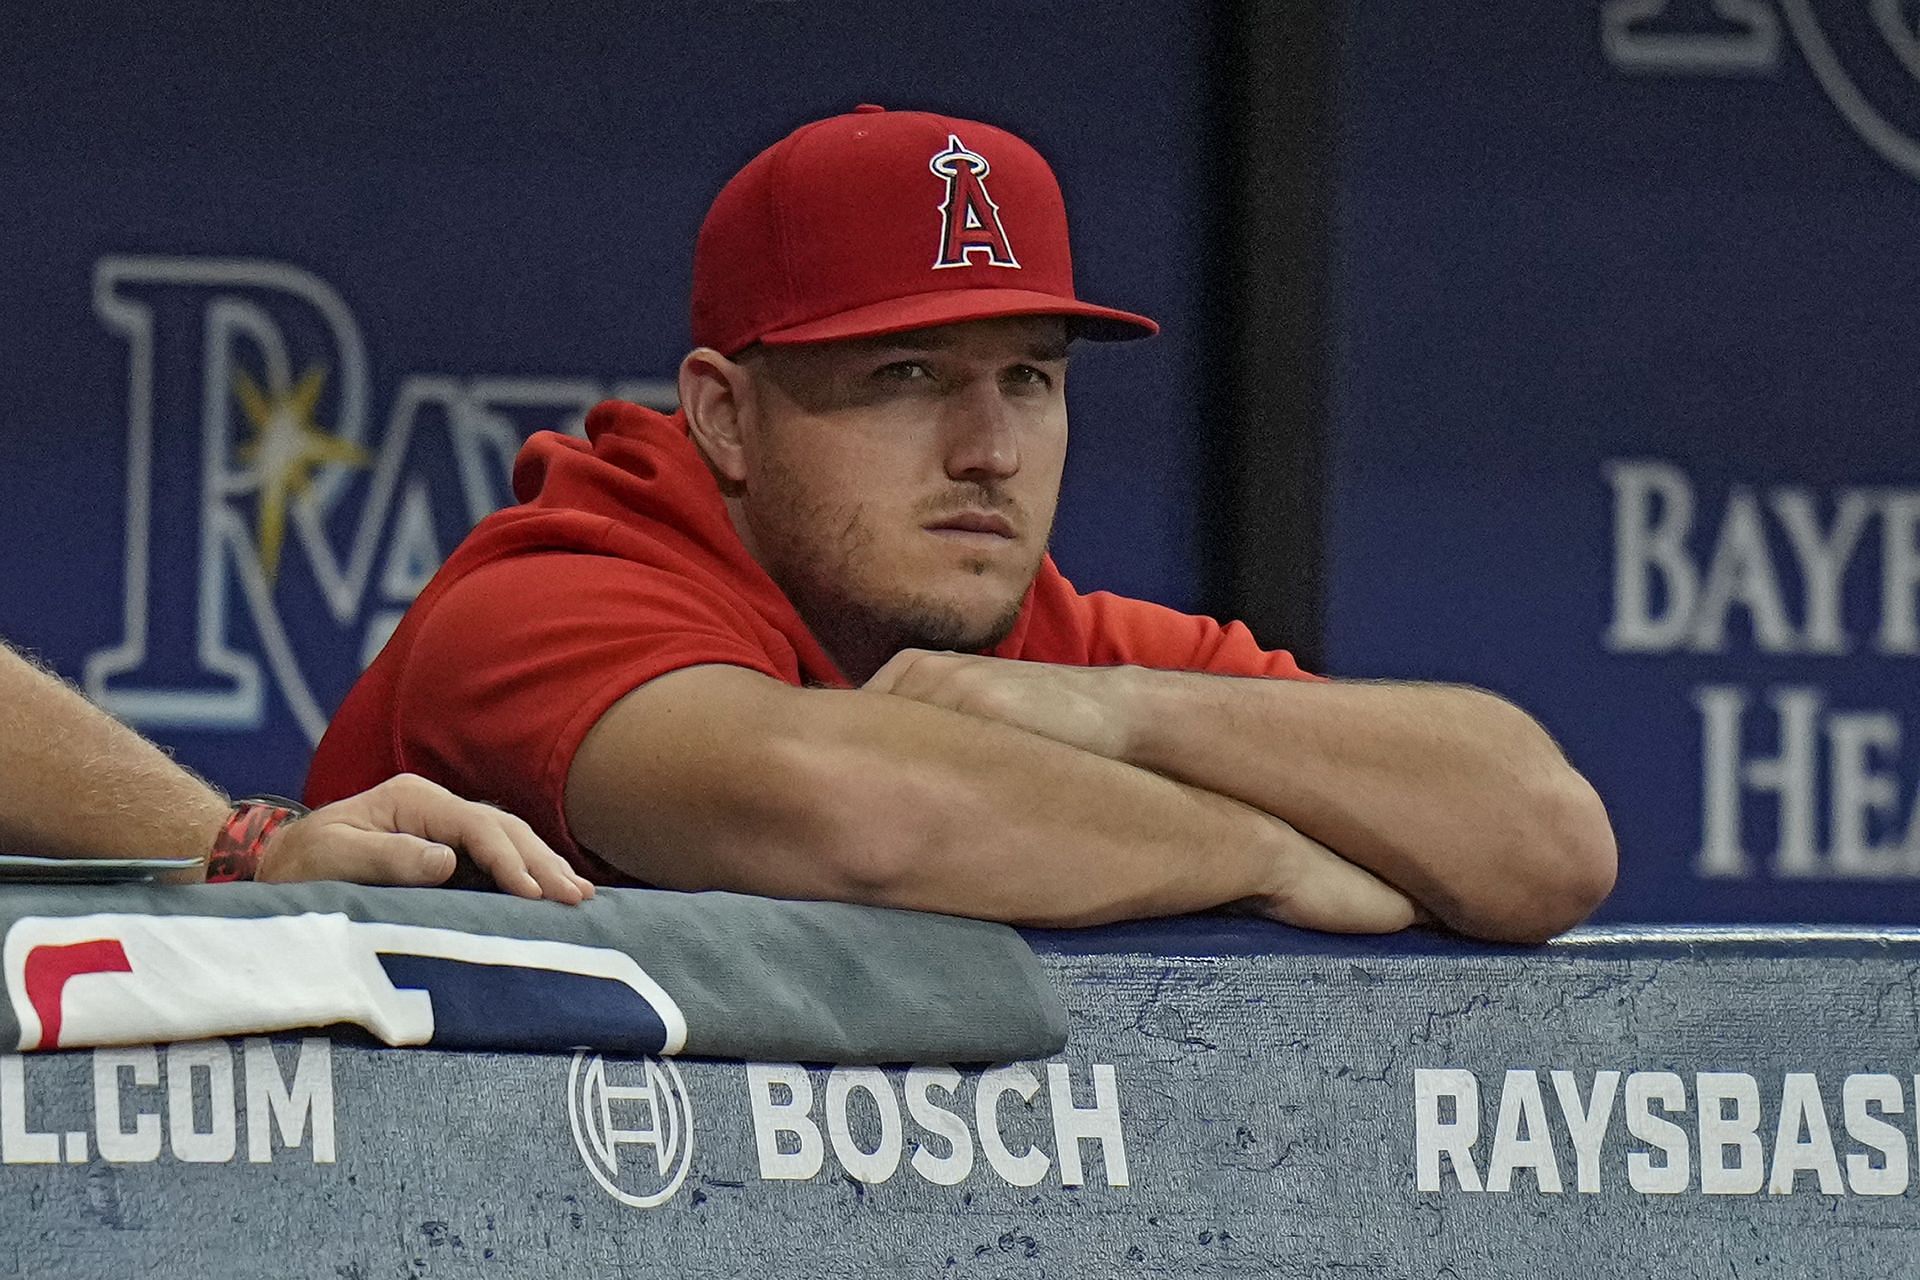 Millville's Mike Trout Has Disappointed Me Again